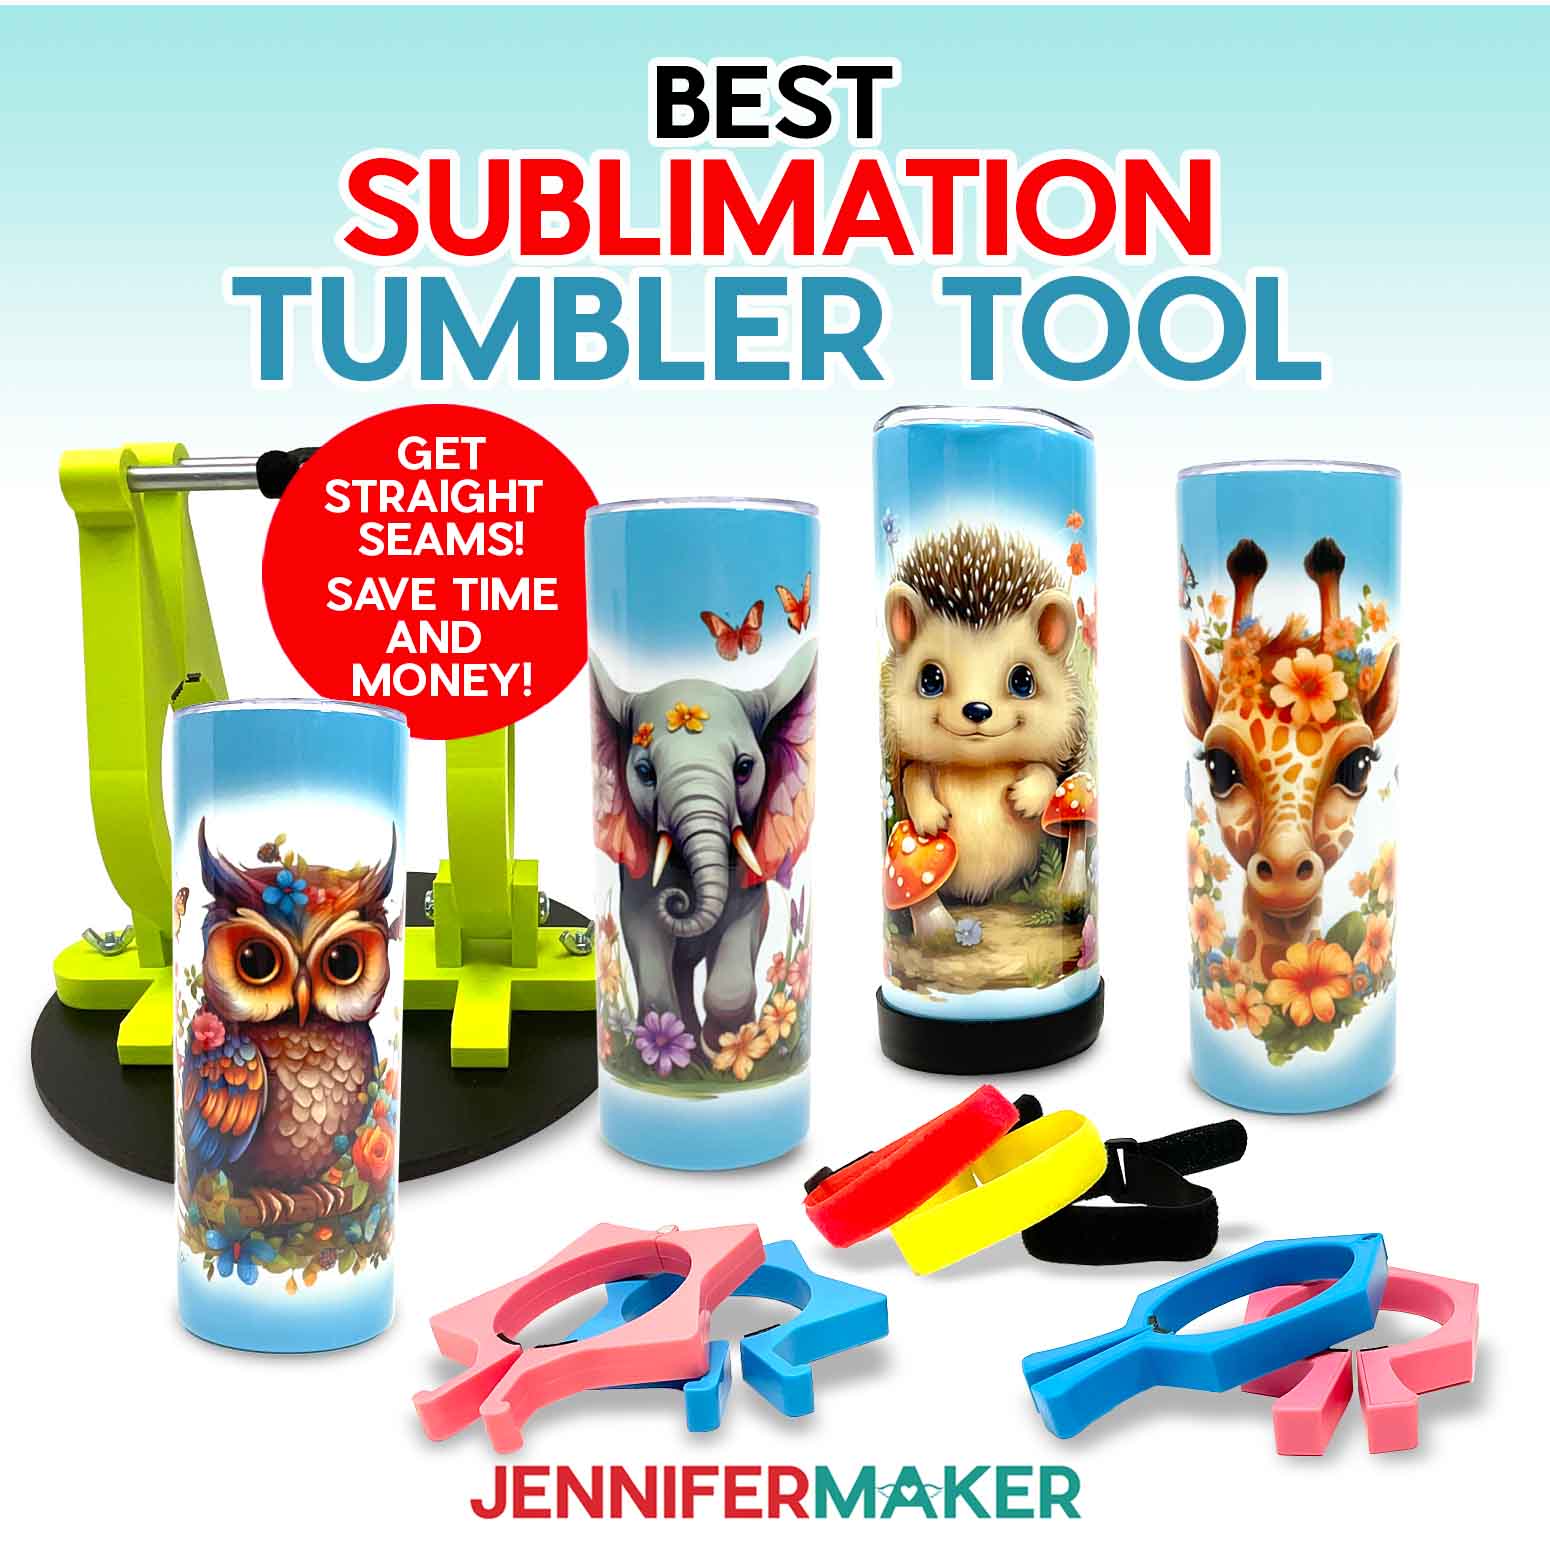 Best Sublimation Tumbler Tools For Better Seams!